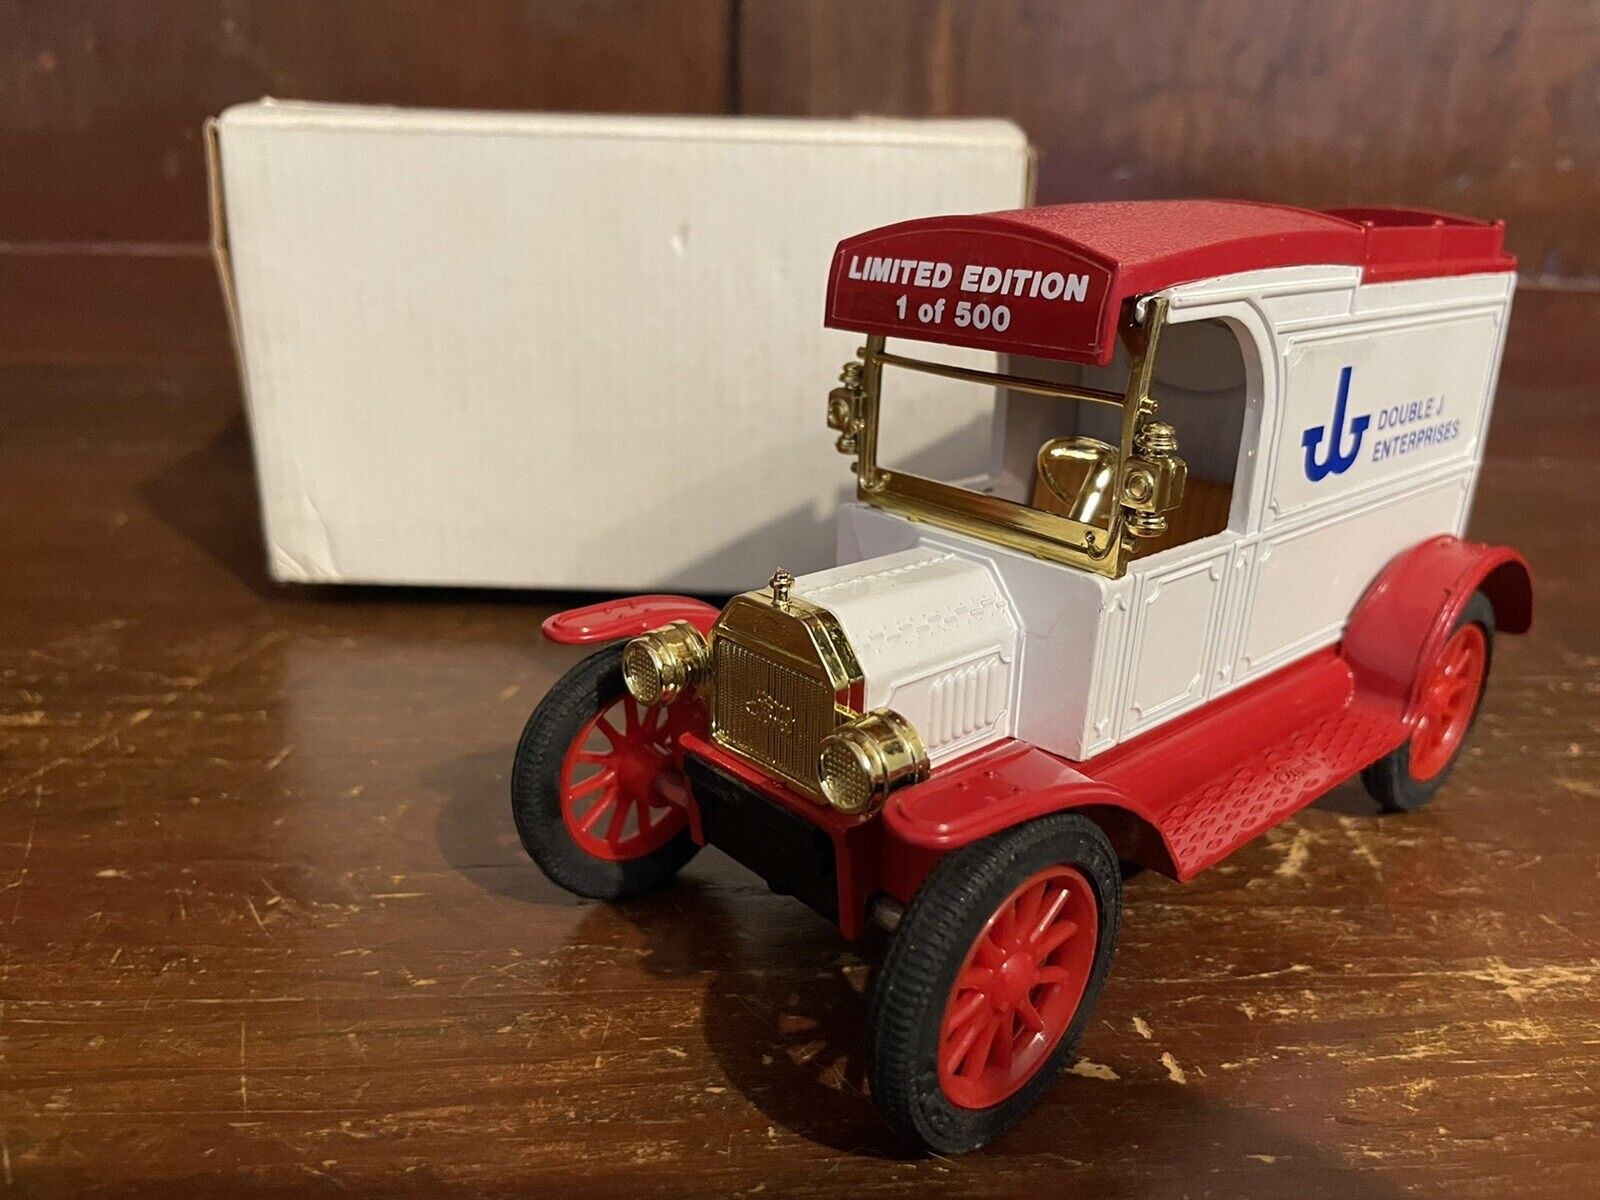 ERTL 1Limited Edition 1 /500 1913 Ford Model T Delivery Truck Diecast Coin Bank